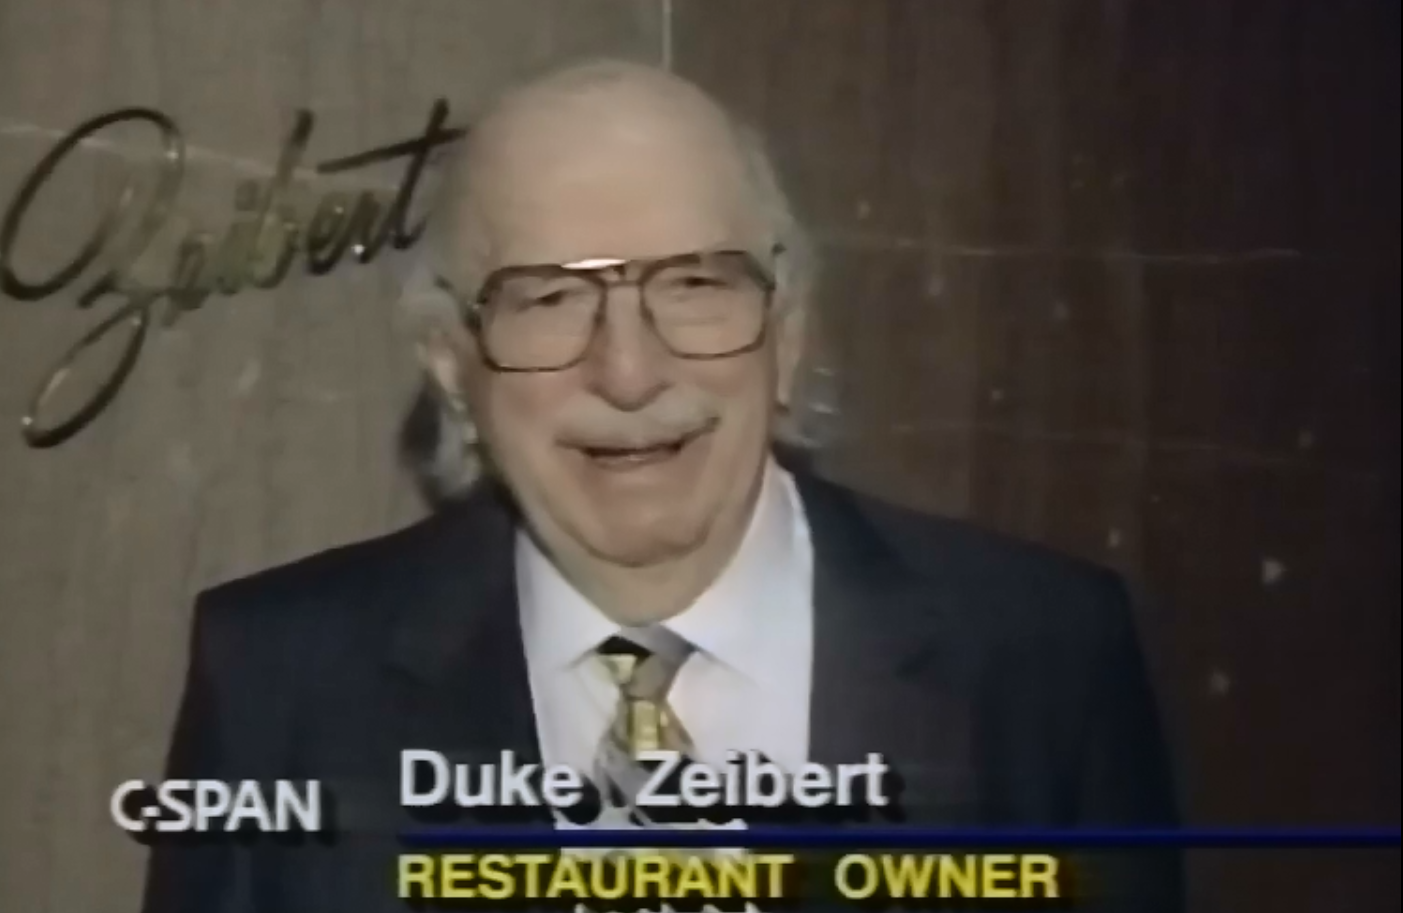 In a brief 1993 interview with C-SPAN, Duke Zeibert took exception to being called an institution. (Courtesy C-SPAN)